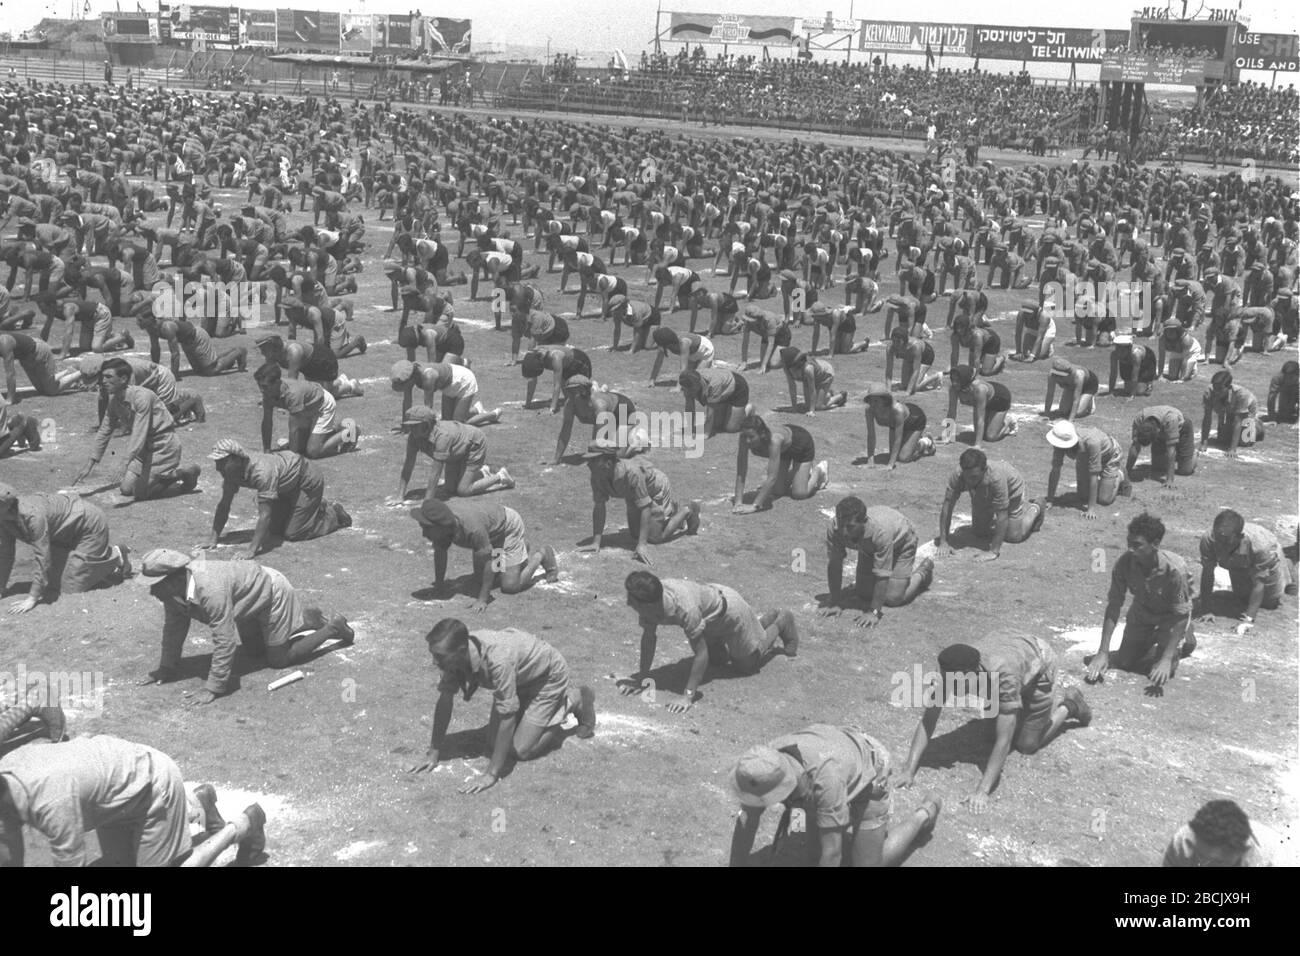 English Mass Gymnastics Performed By Members Of The Hapoel Sports Organization At The Stadium During The Workers Sports Rally In Tel Aviv O U I O U U E O U I O U O I U U I E O Ss O O U